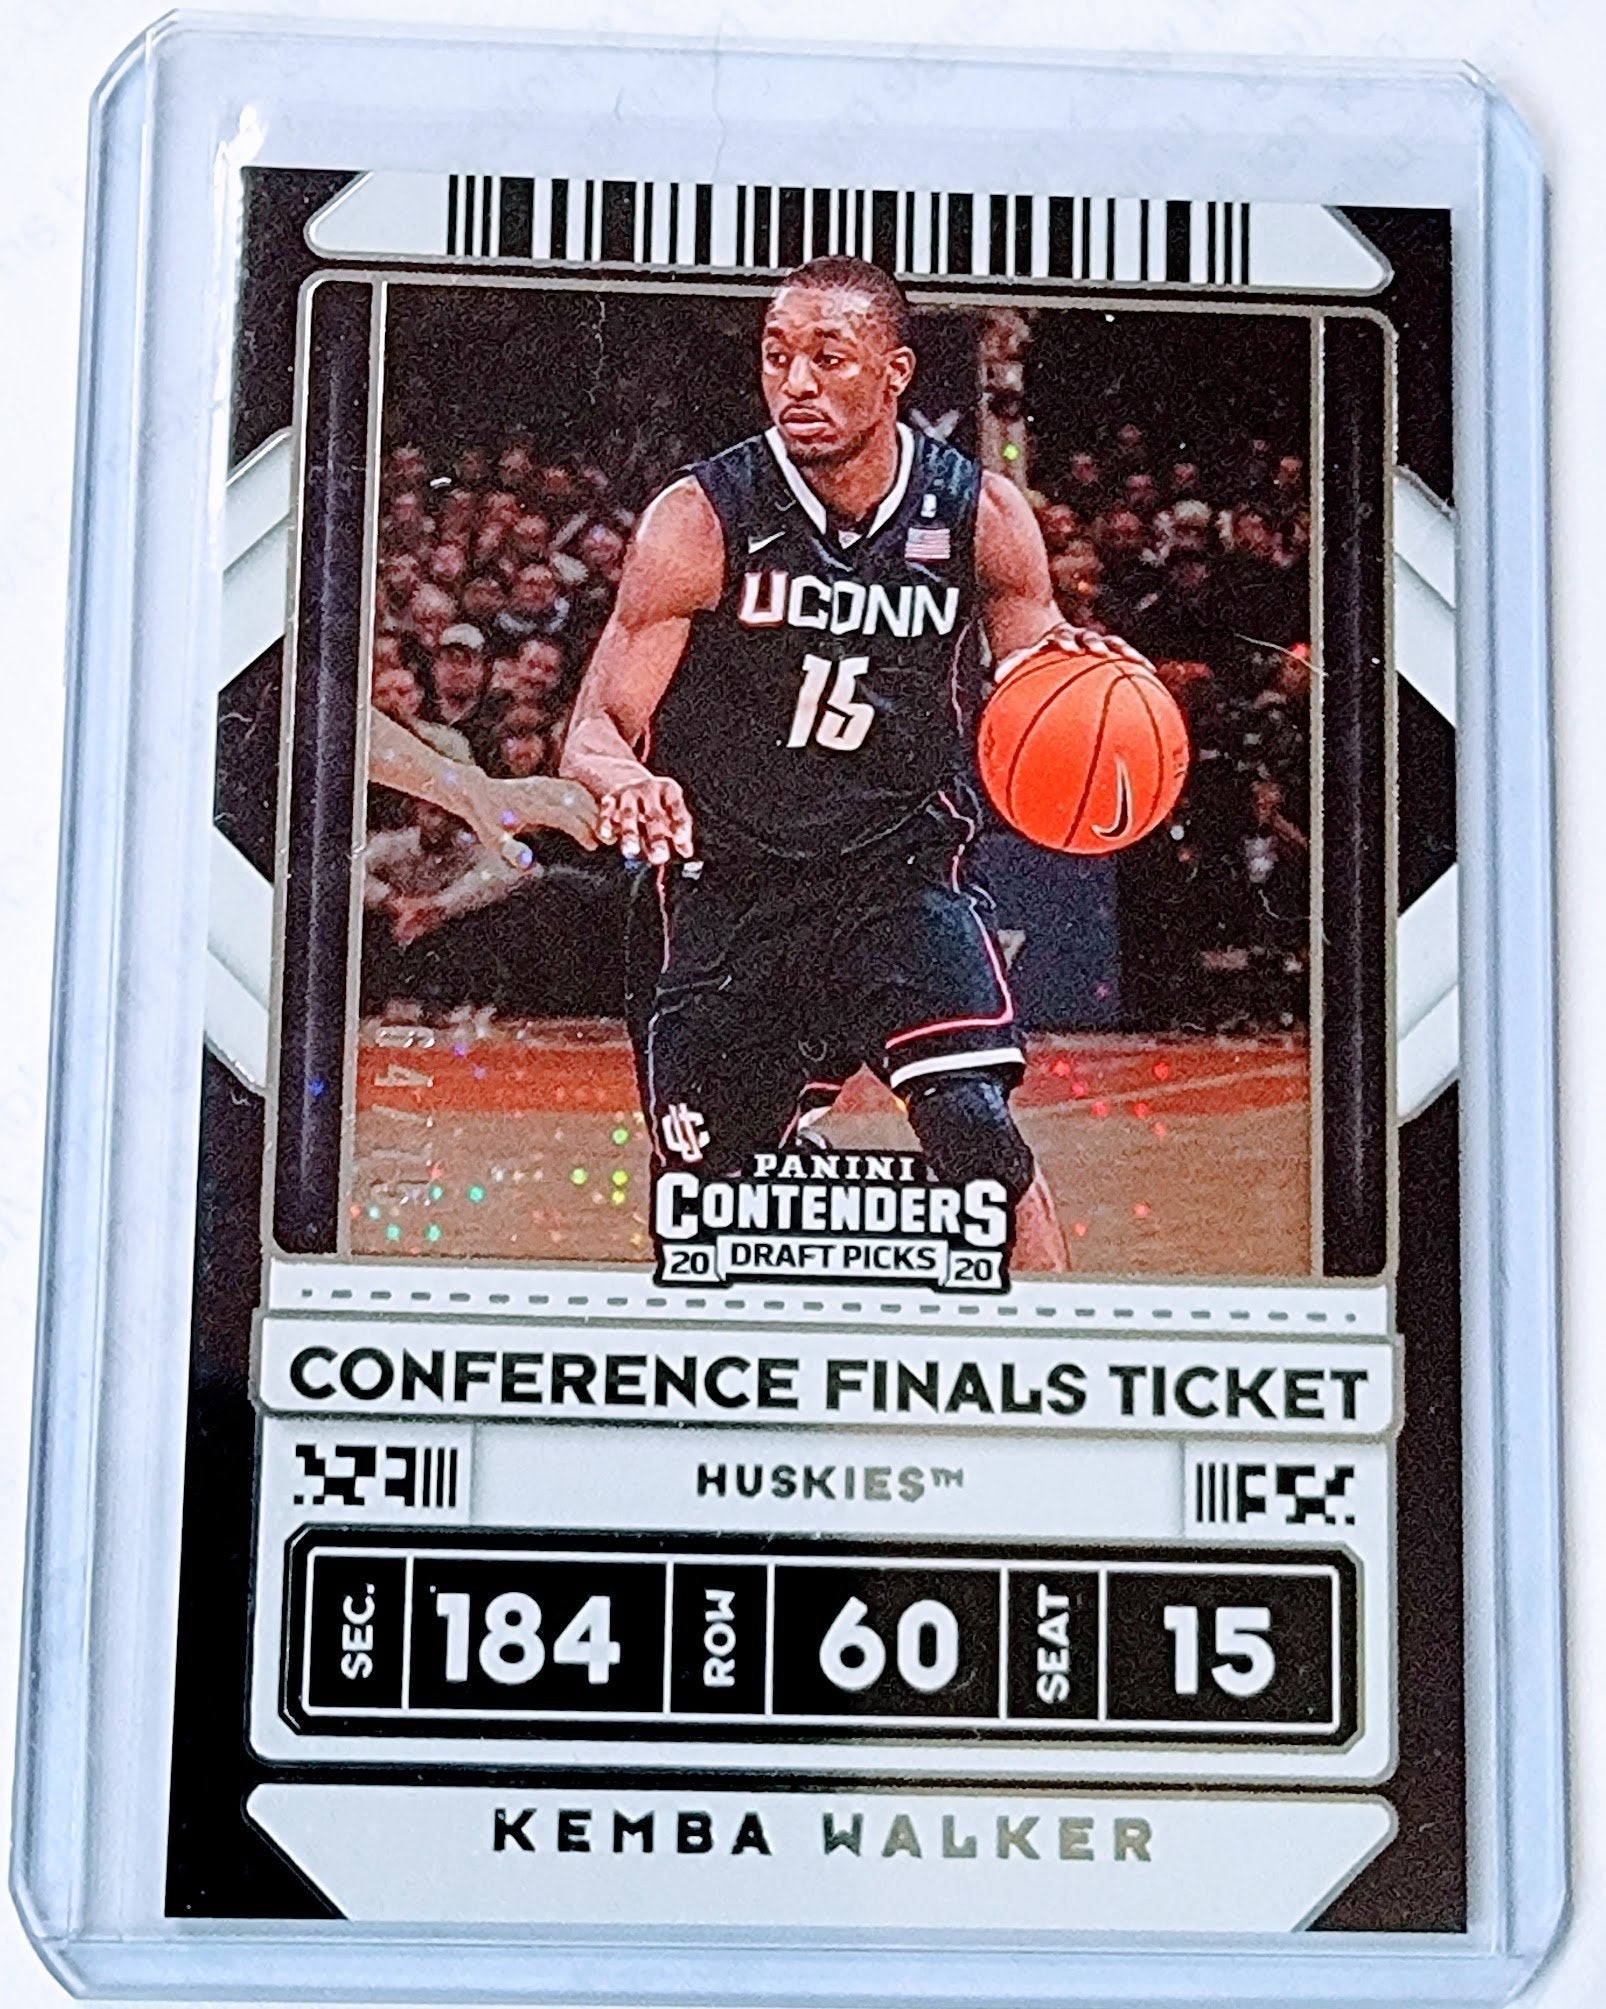 2020-21 Panini Contenders Draft Picks Kemba Walker Conference Finals Ticket #'d/75 Refractor Basketball Trading Card GRB1 simple Xclusive Collectibles   